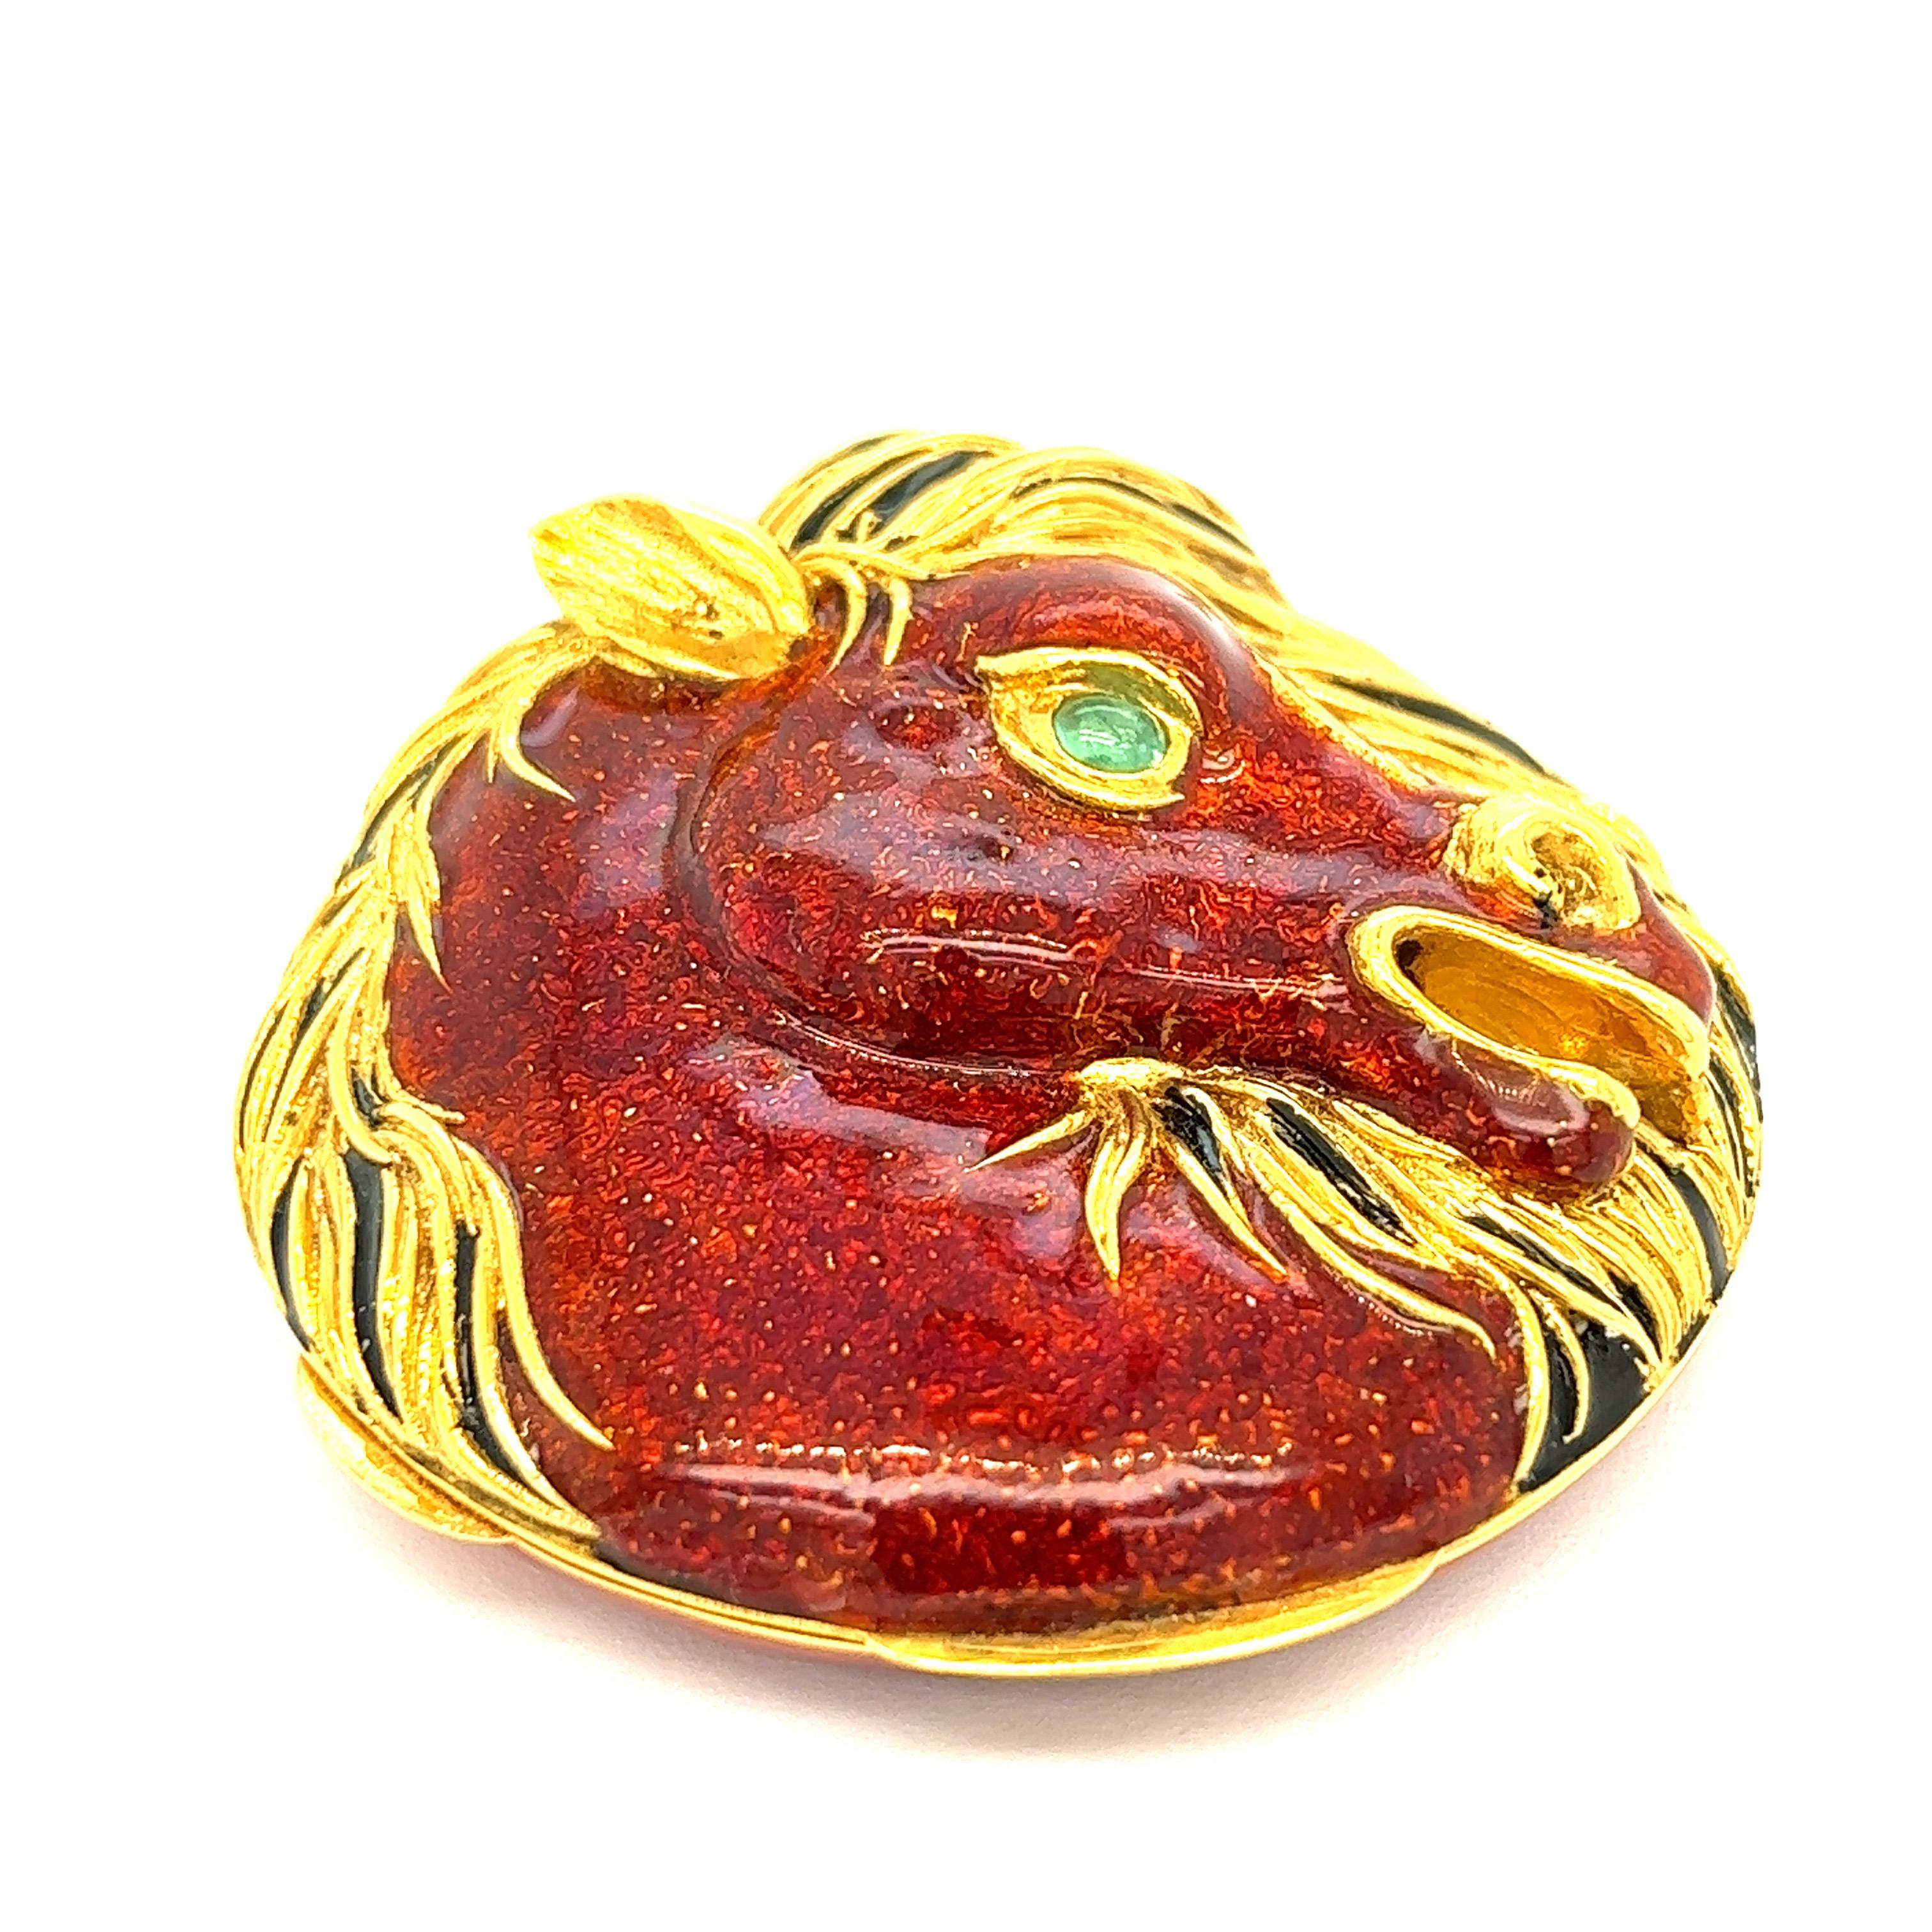 Enamel chrysoprase horse compact case

Possibly made by Frascarolo, a horse head made out of enamel with a chrysoprase eye, 18 karat yellow gold; marked 038, 750

Size: width 2.25 inches, length 2.25 inches
Total weight: 107.1 grams